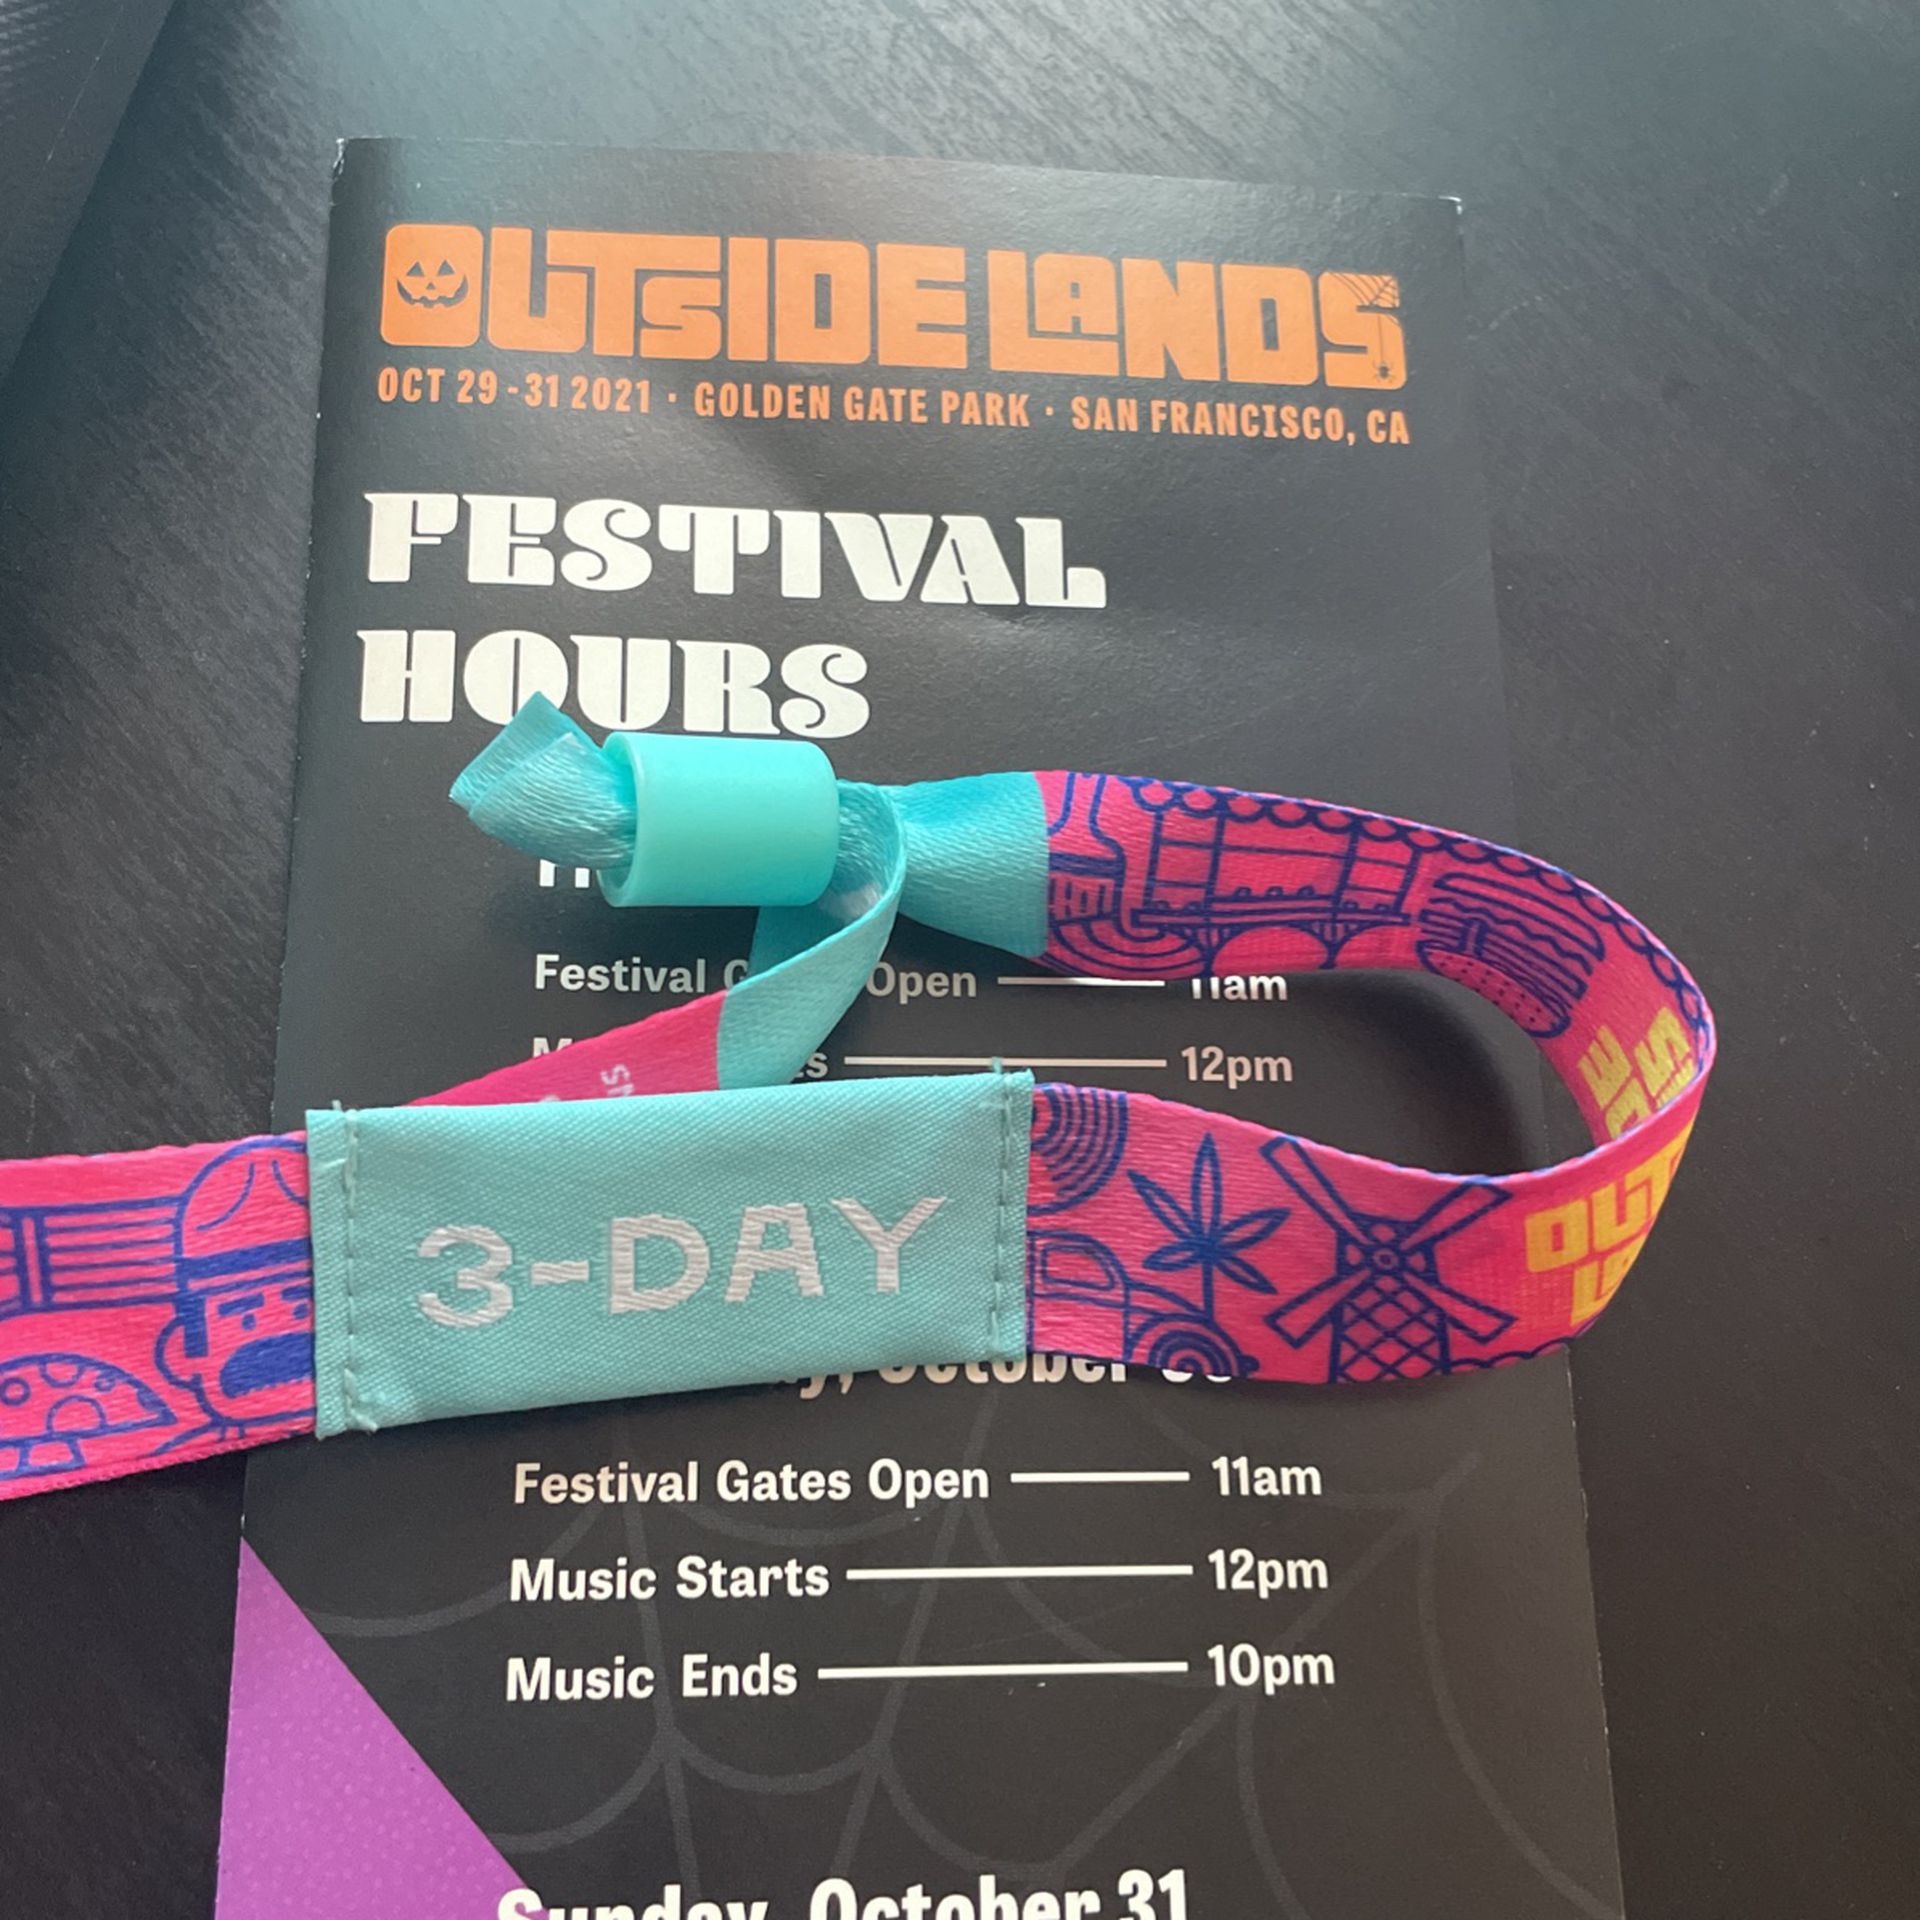 Outside lands 3 Day Pass